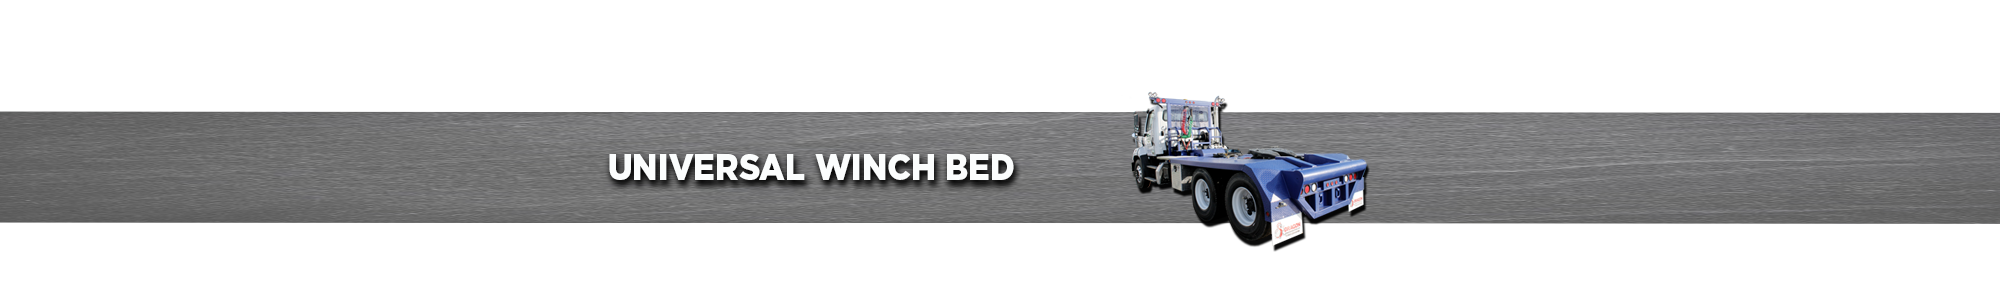 Universal Winch Bed